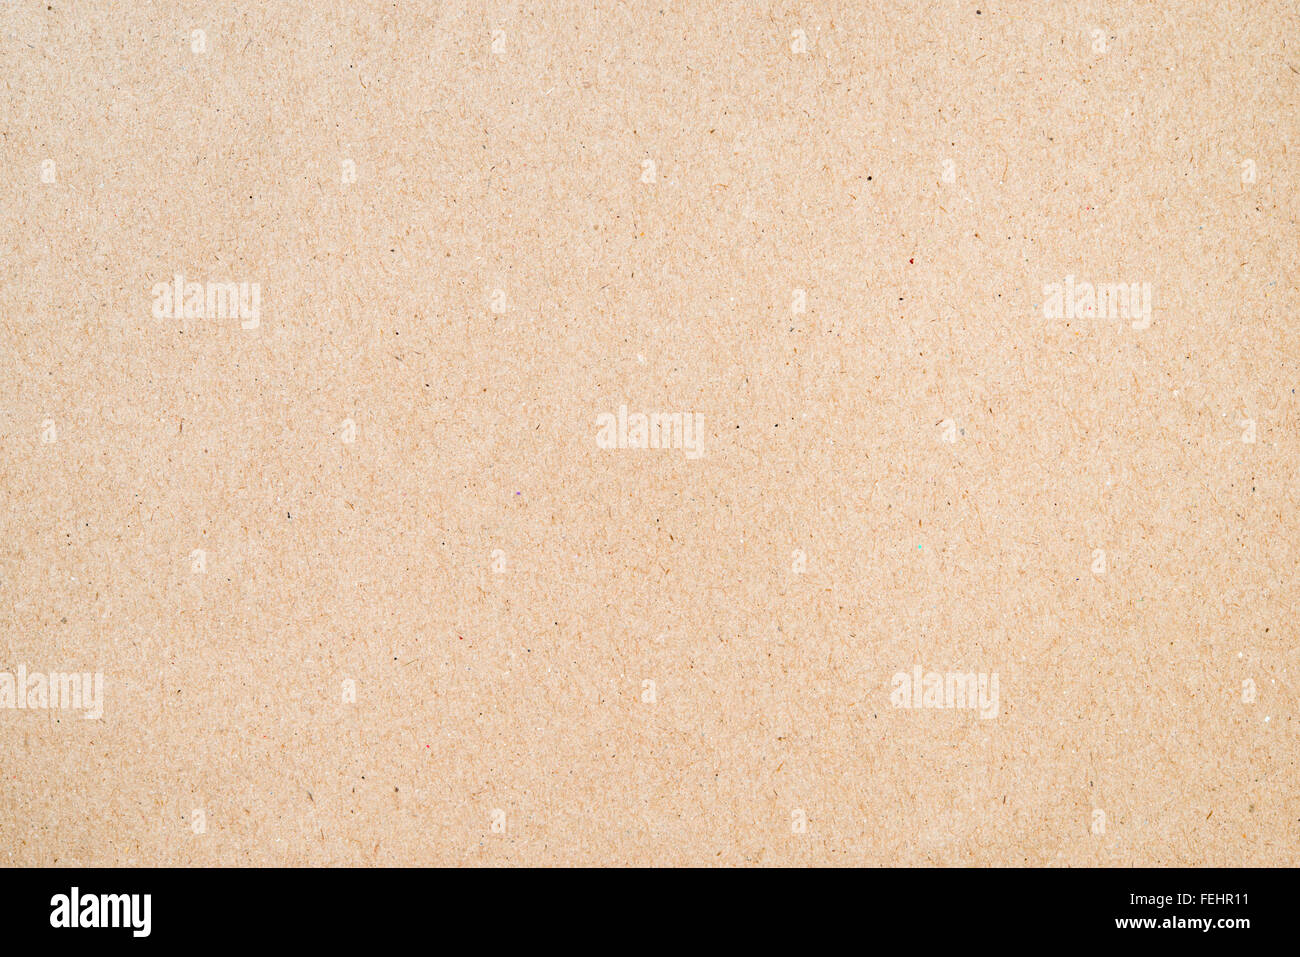 Recycled paper texture Stock Photo